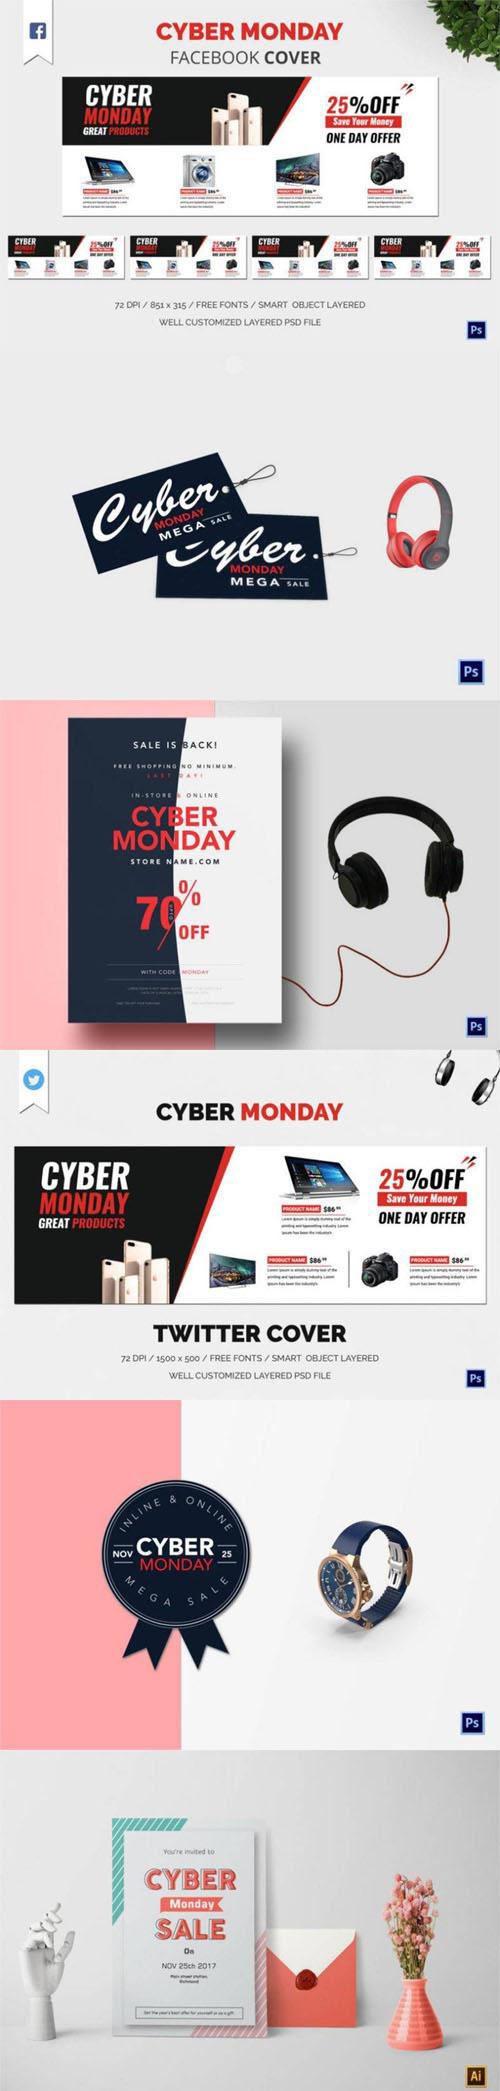 15 Designs and Templates You Need for Cyber Monday Creatives